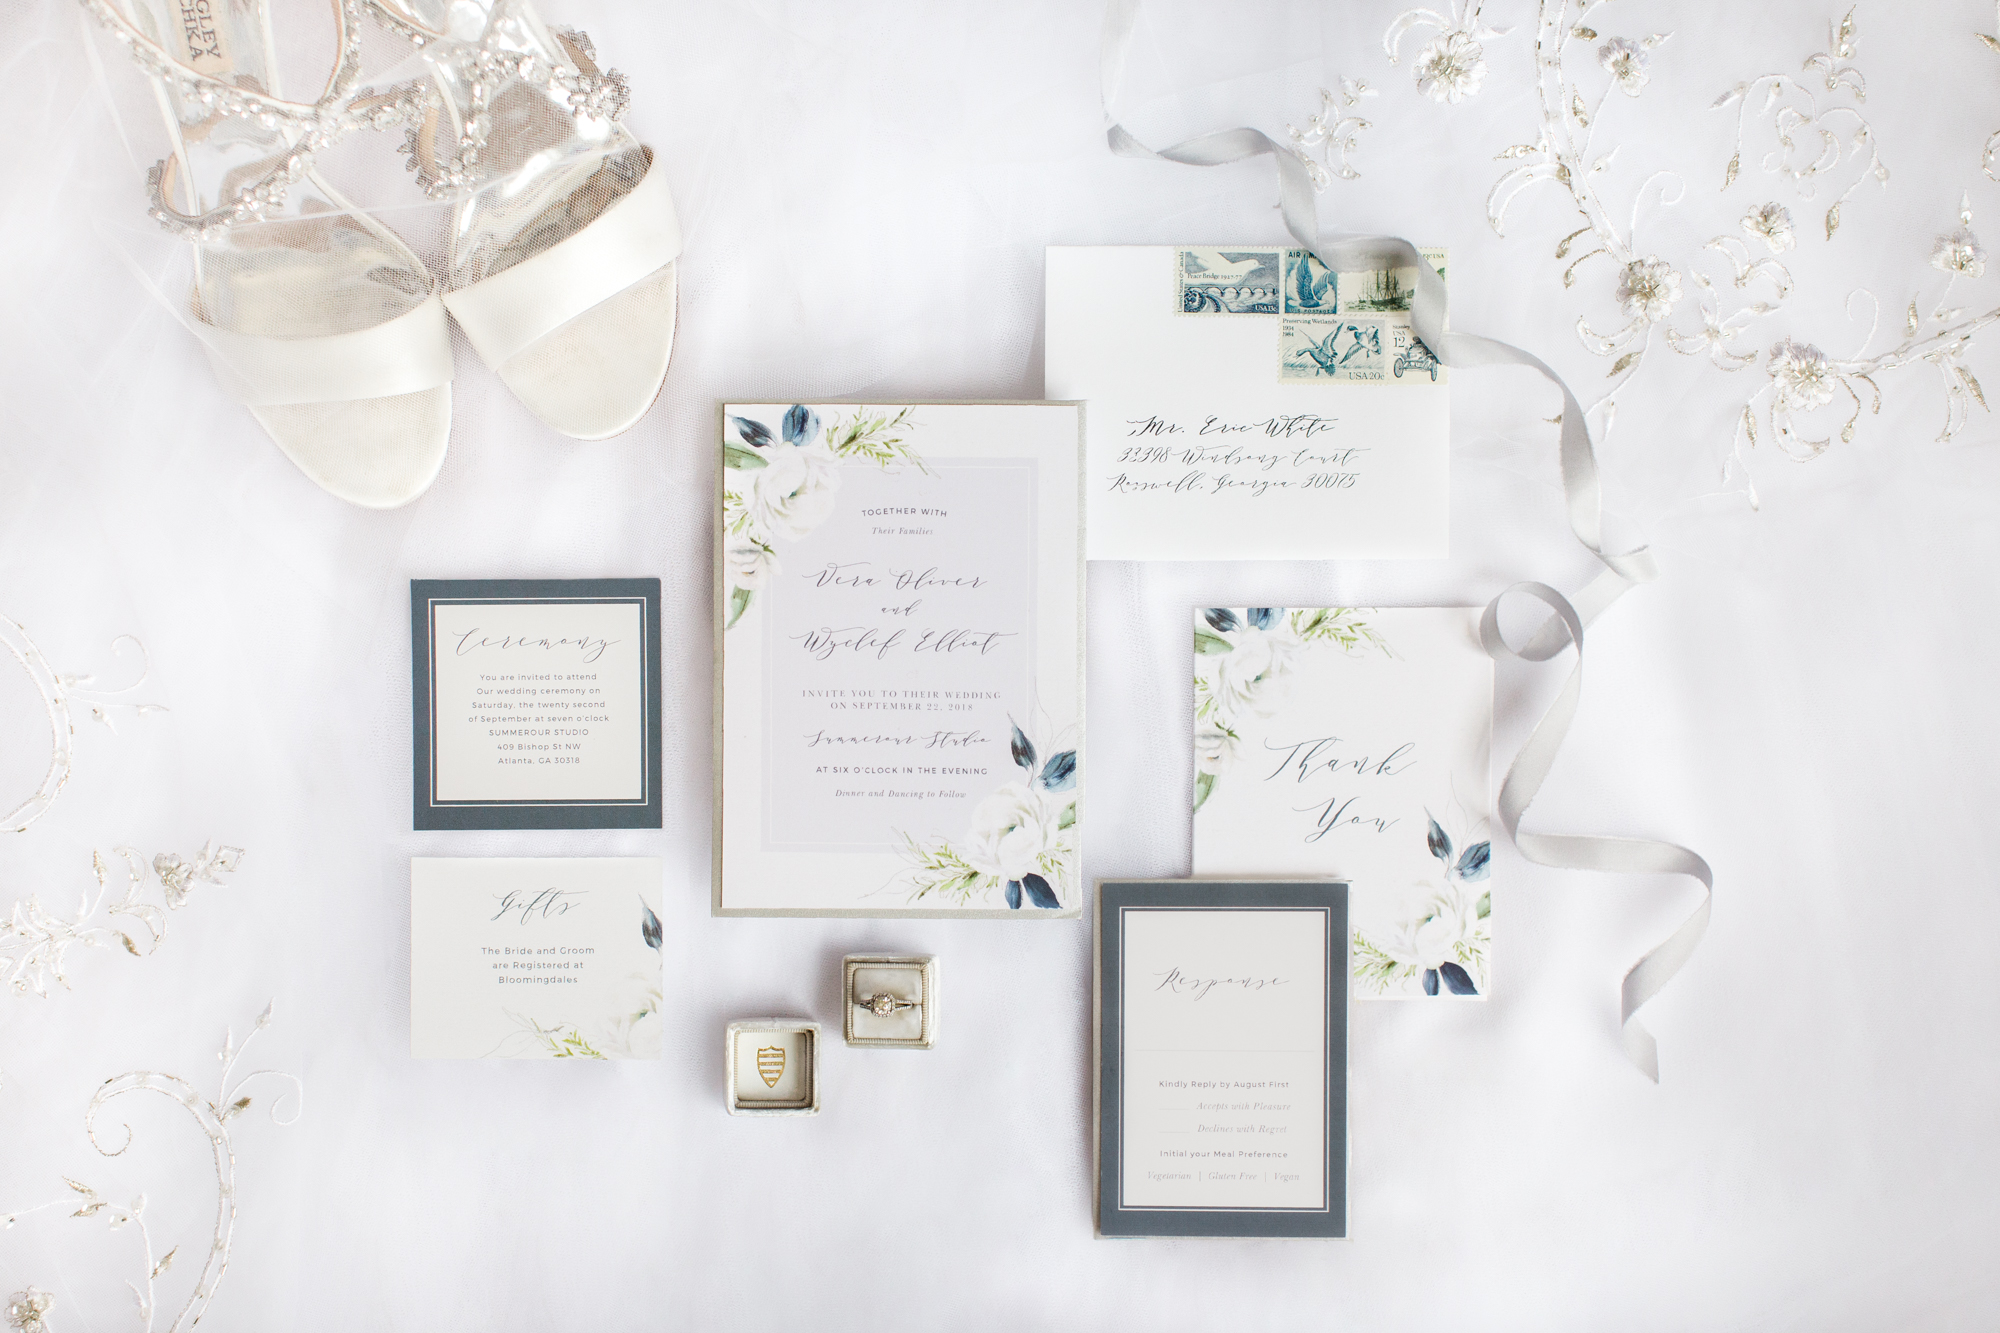 Wedding invitation ideas are everywhere, but I happen to love this floral set from Basic Invite.